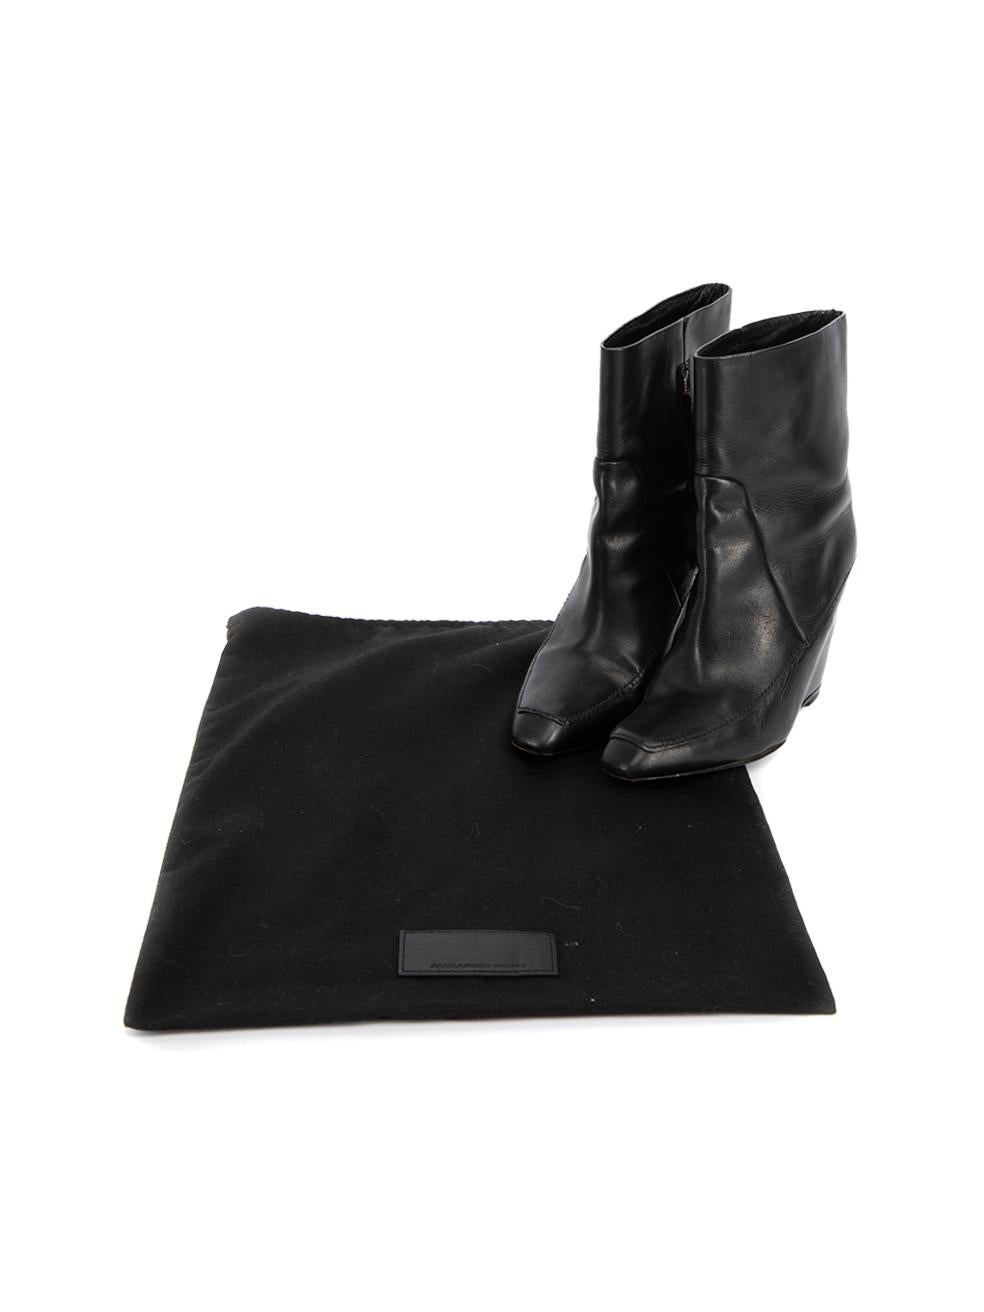 Alexander Wang Black Leather Zip Up Wedge Boots Size IT 37 1